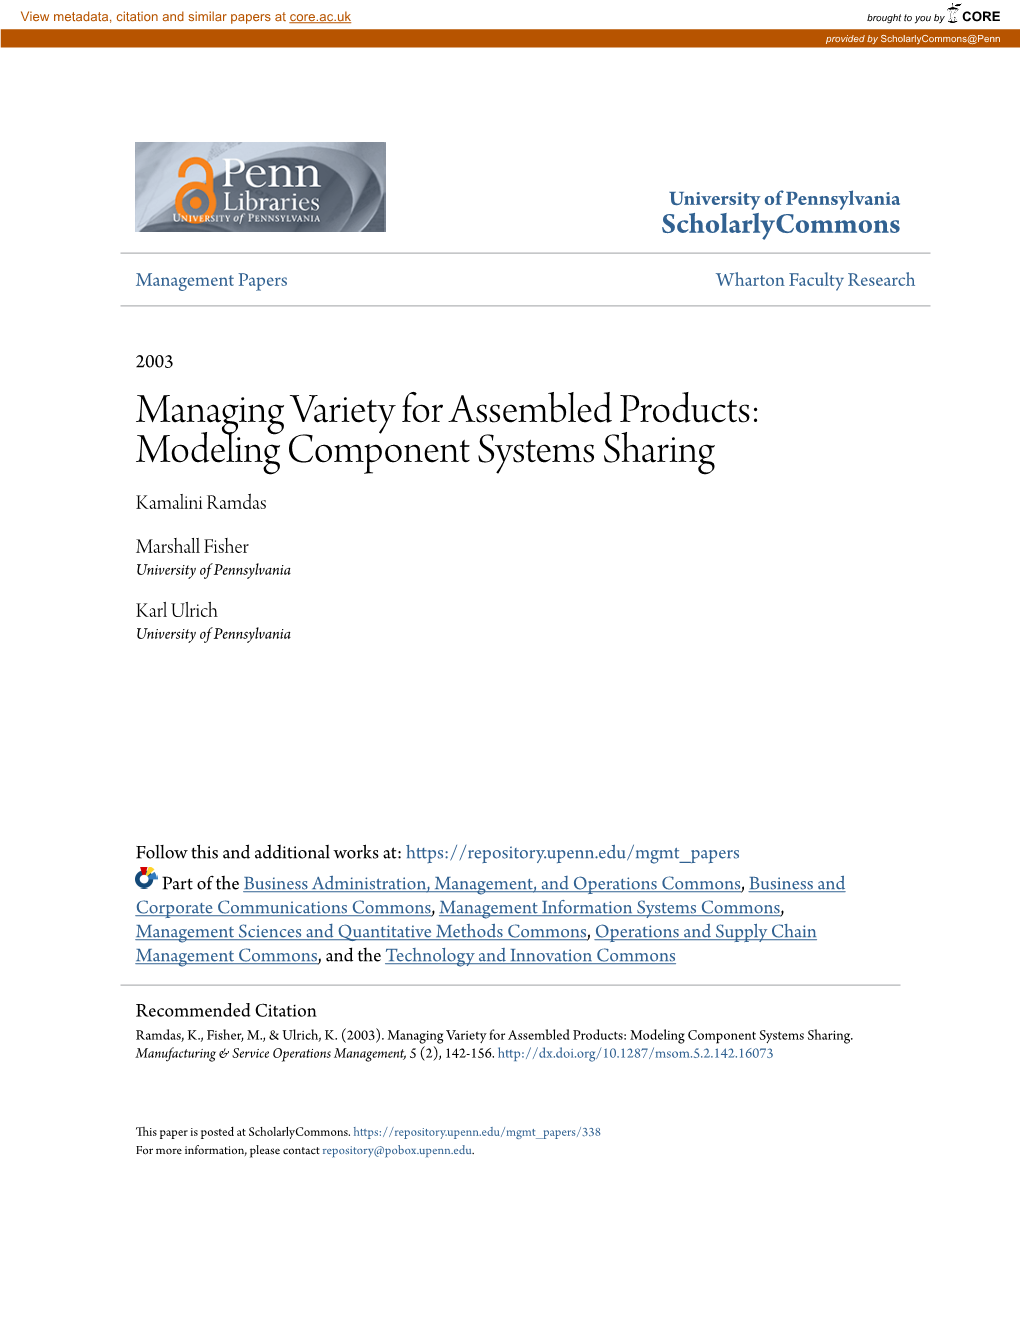 Managing Variety for Assembled Products: Modeling Component Systems Sharing Kamalini Ramdas